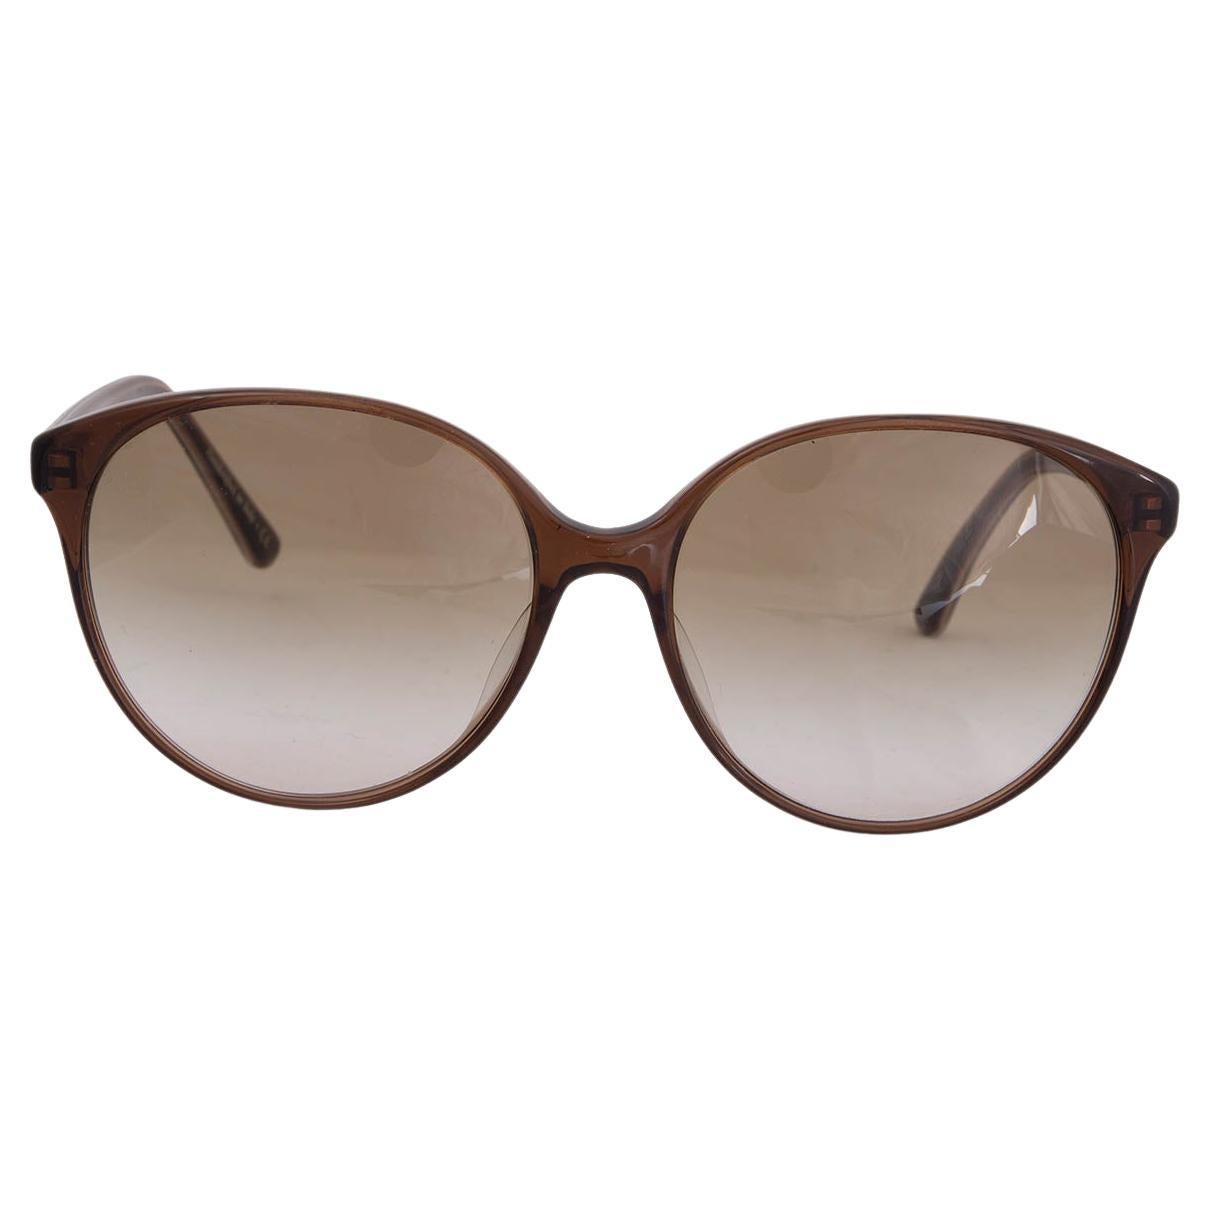 OLIVER PEOPLES x THE ROW brown BROOKTREE ROUND Sunglasses OV5425SU